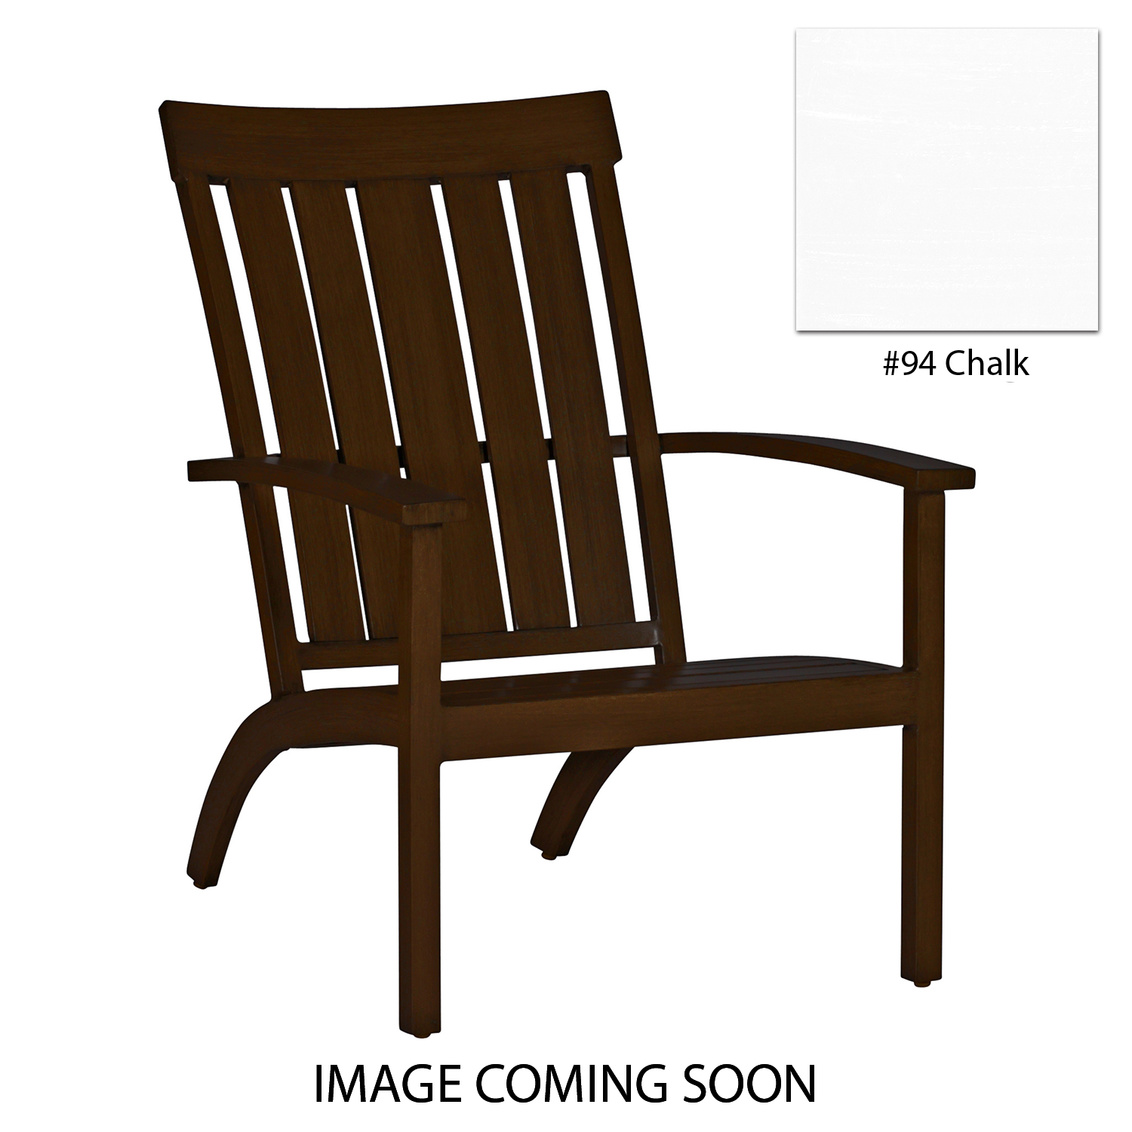 club aluminum adirondack chair in chalk – frame only product image